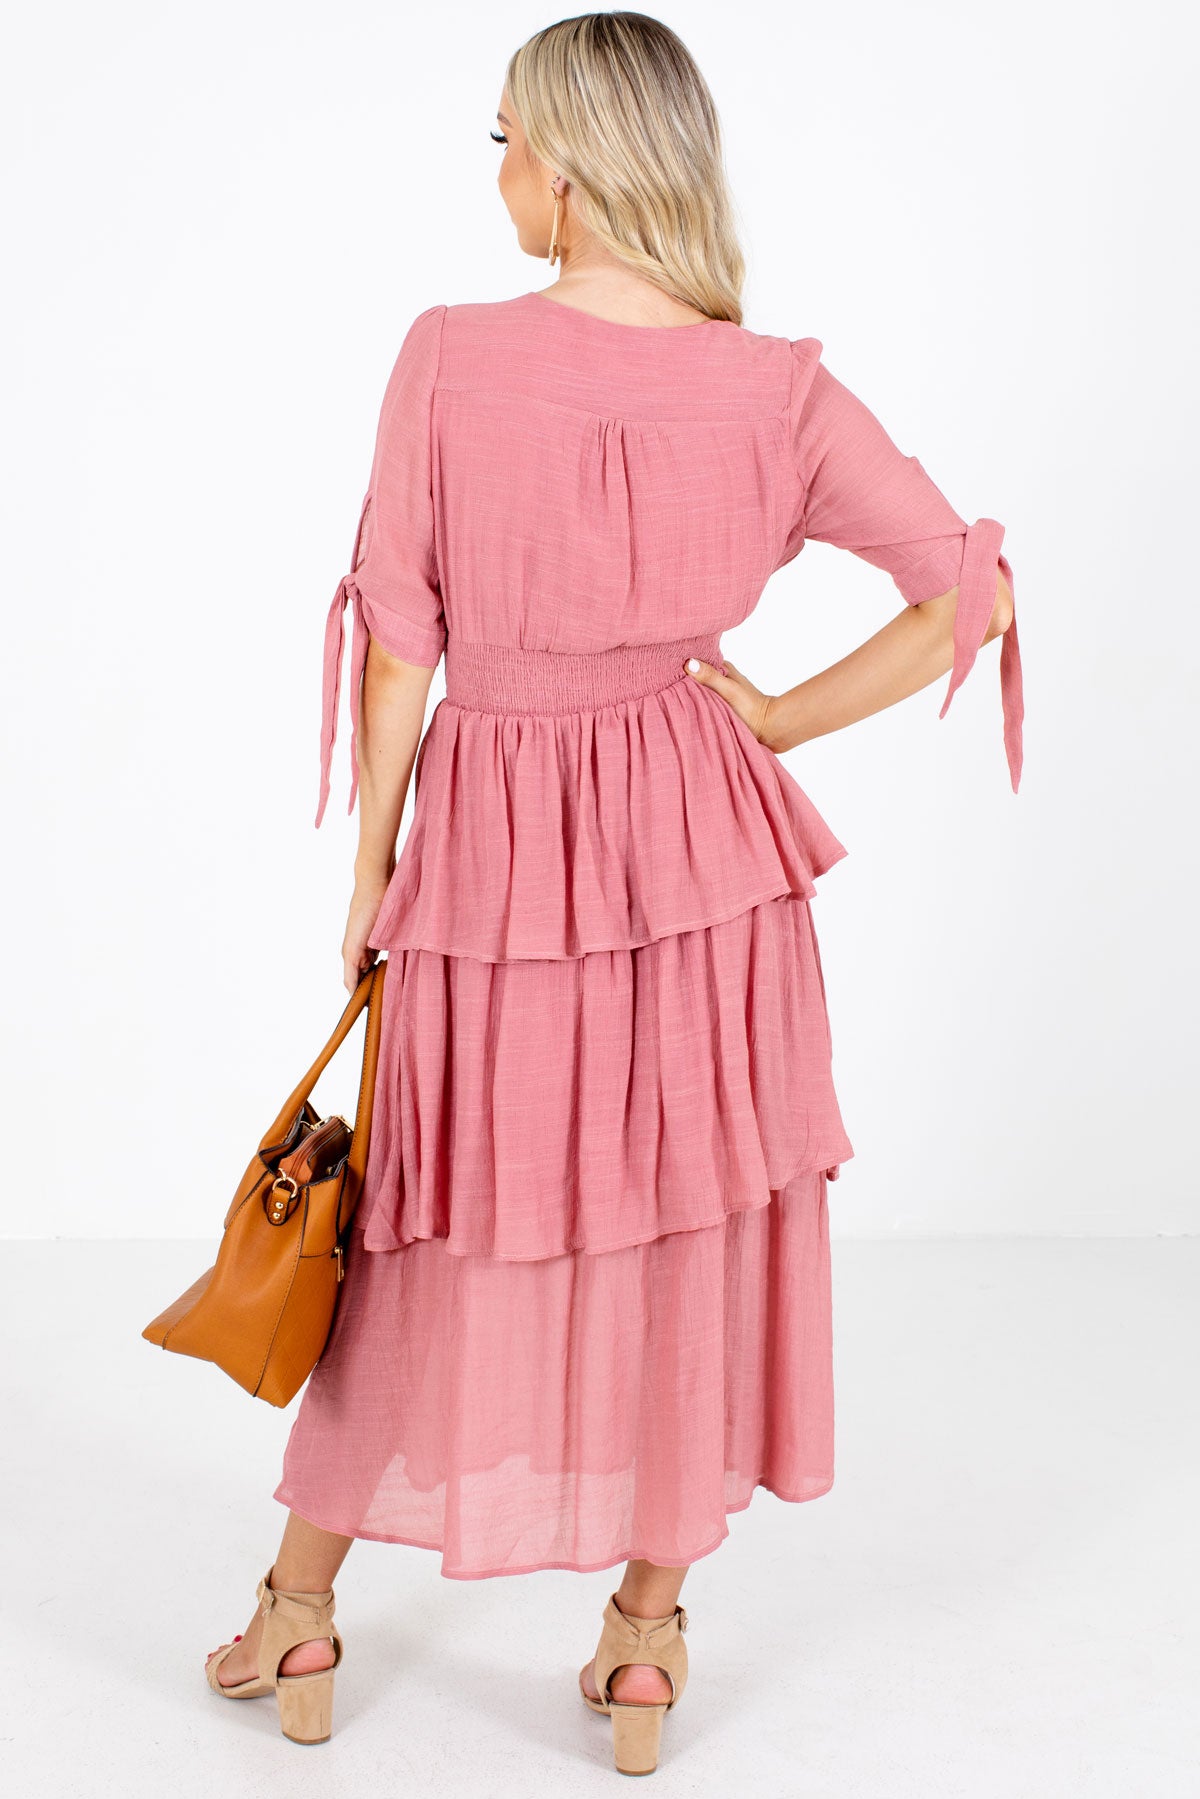 Women's Pink Smocked Boutique Maxi Dress